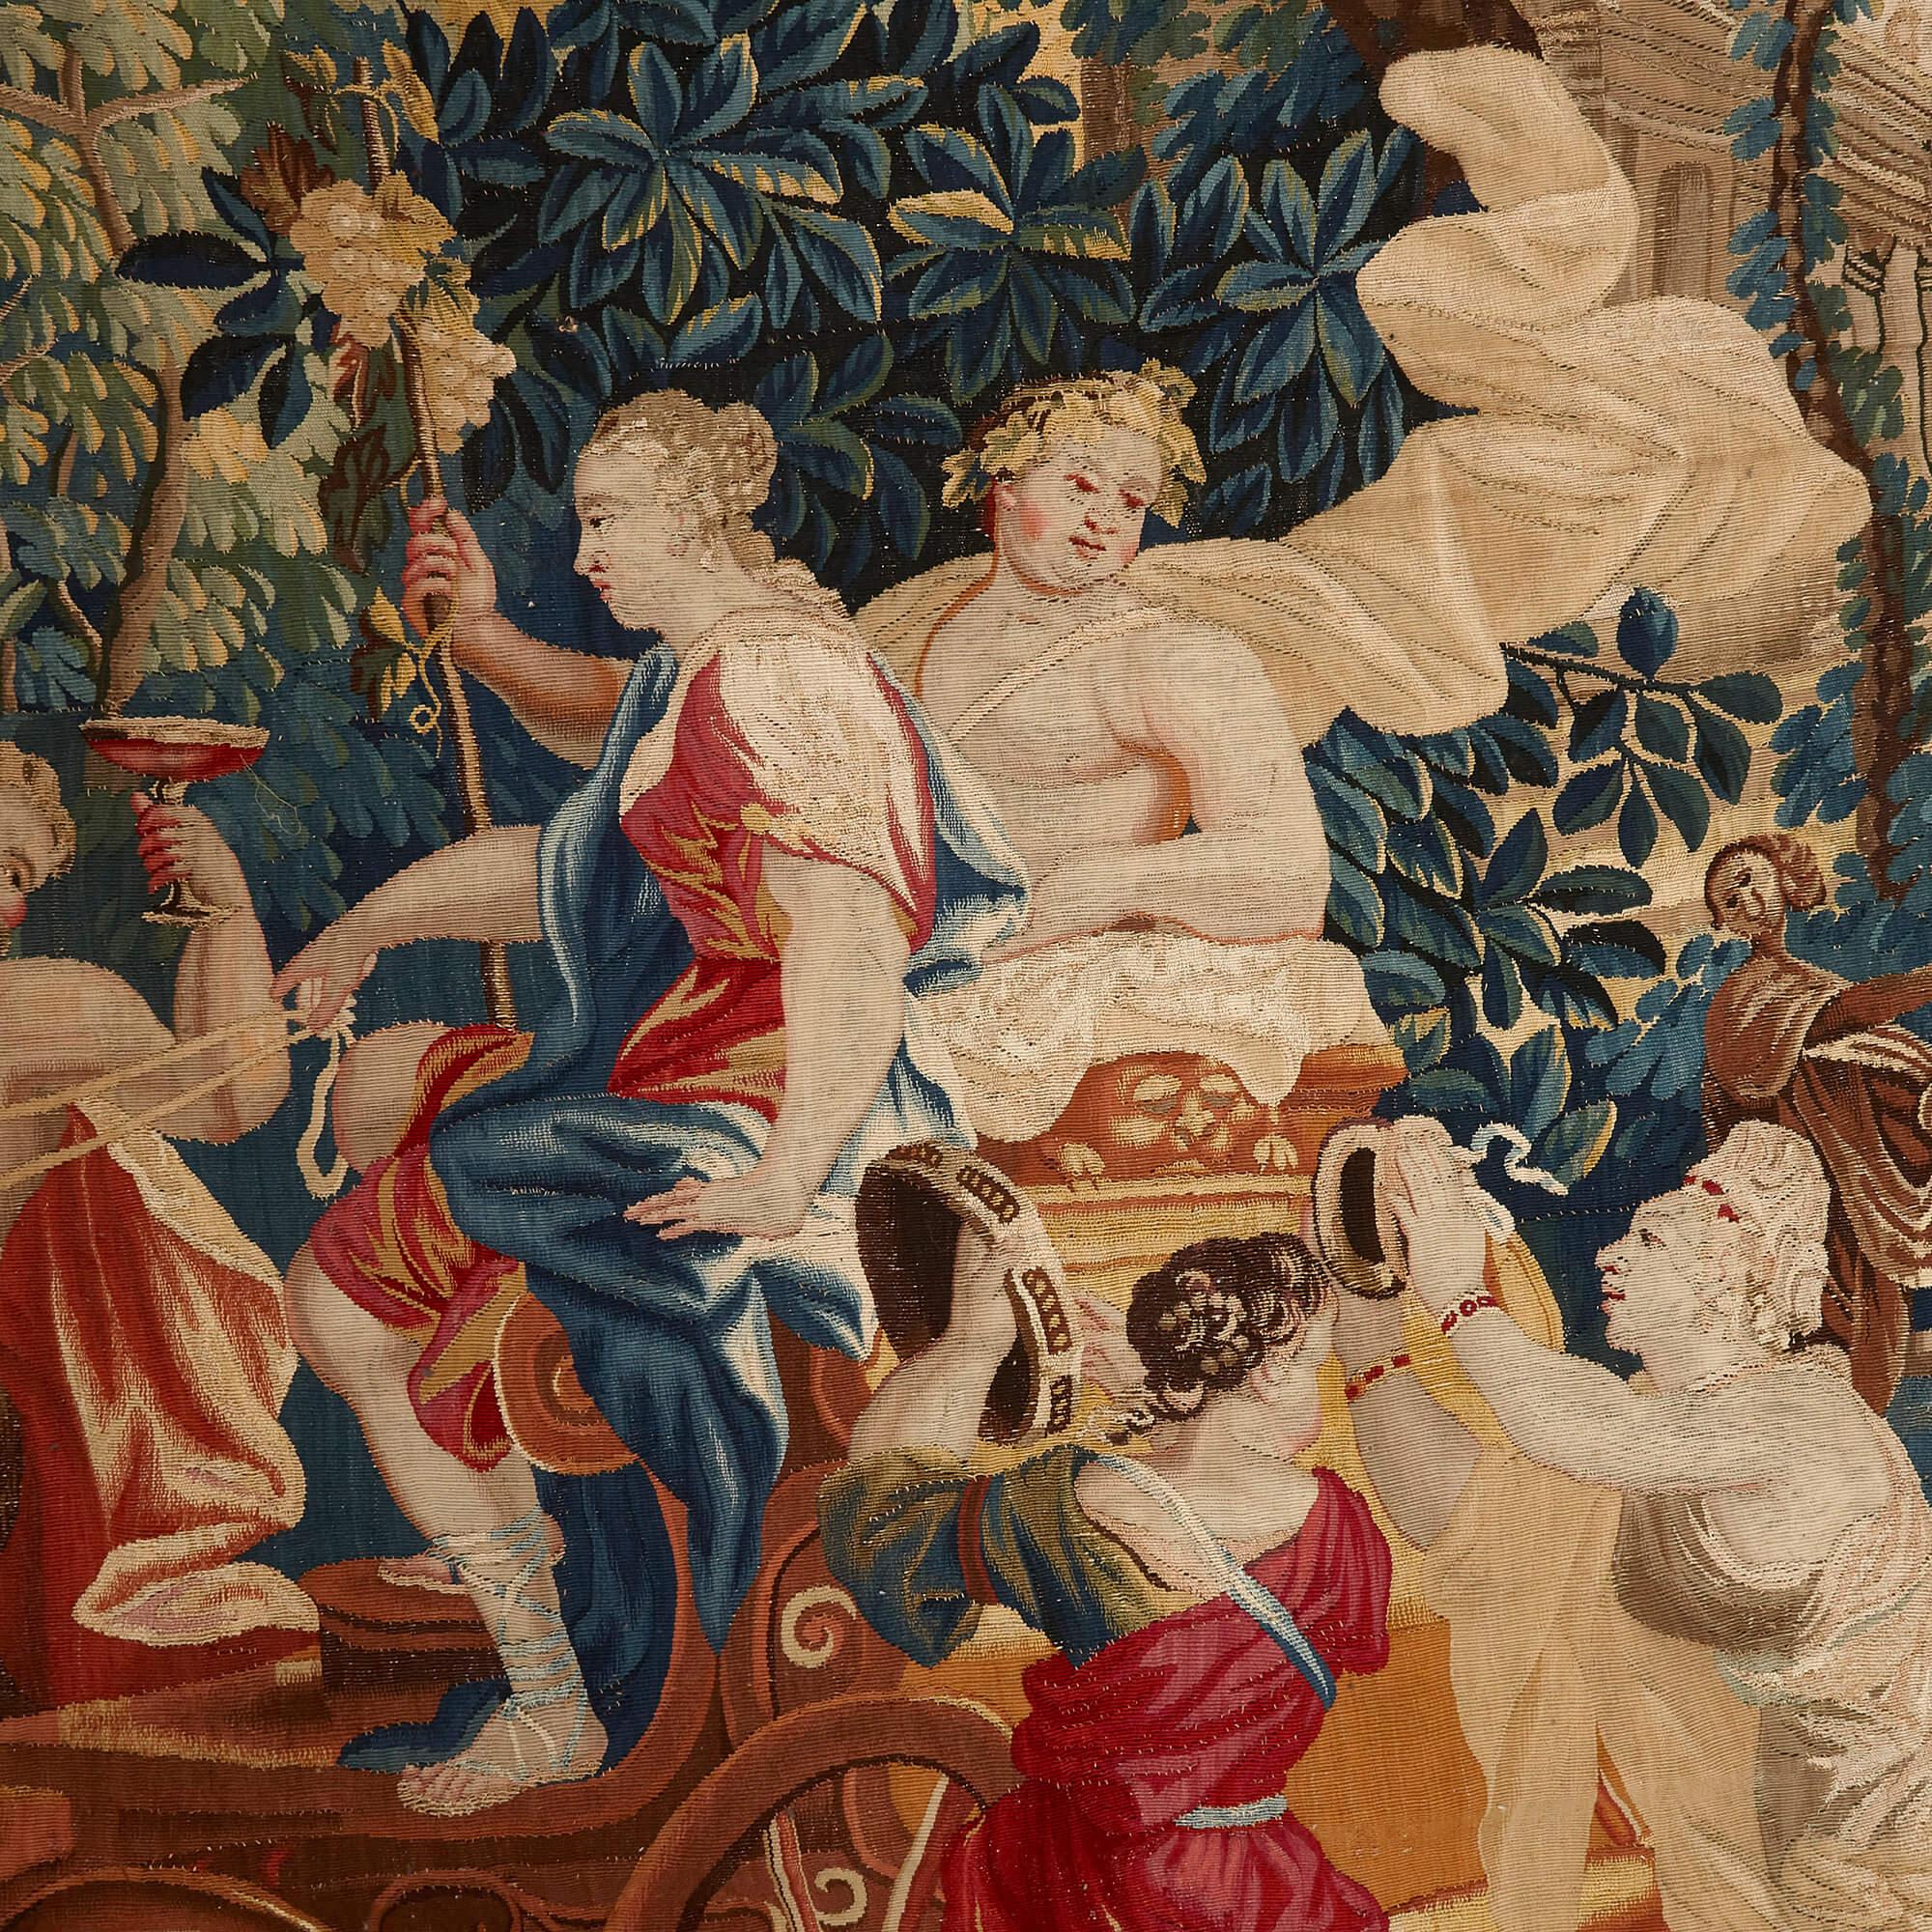 Bacchus and Ariadne, early 18th Century mythological tapestry
Flemish, early 18th Century
Width 428cm, depth 276cm, height 2cm

The tapestry is rectangular and is woven within a four-sided narrow golden frame pattern border. It depicts the god